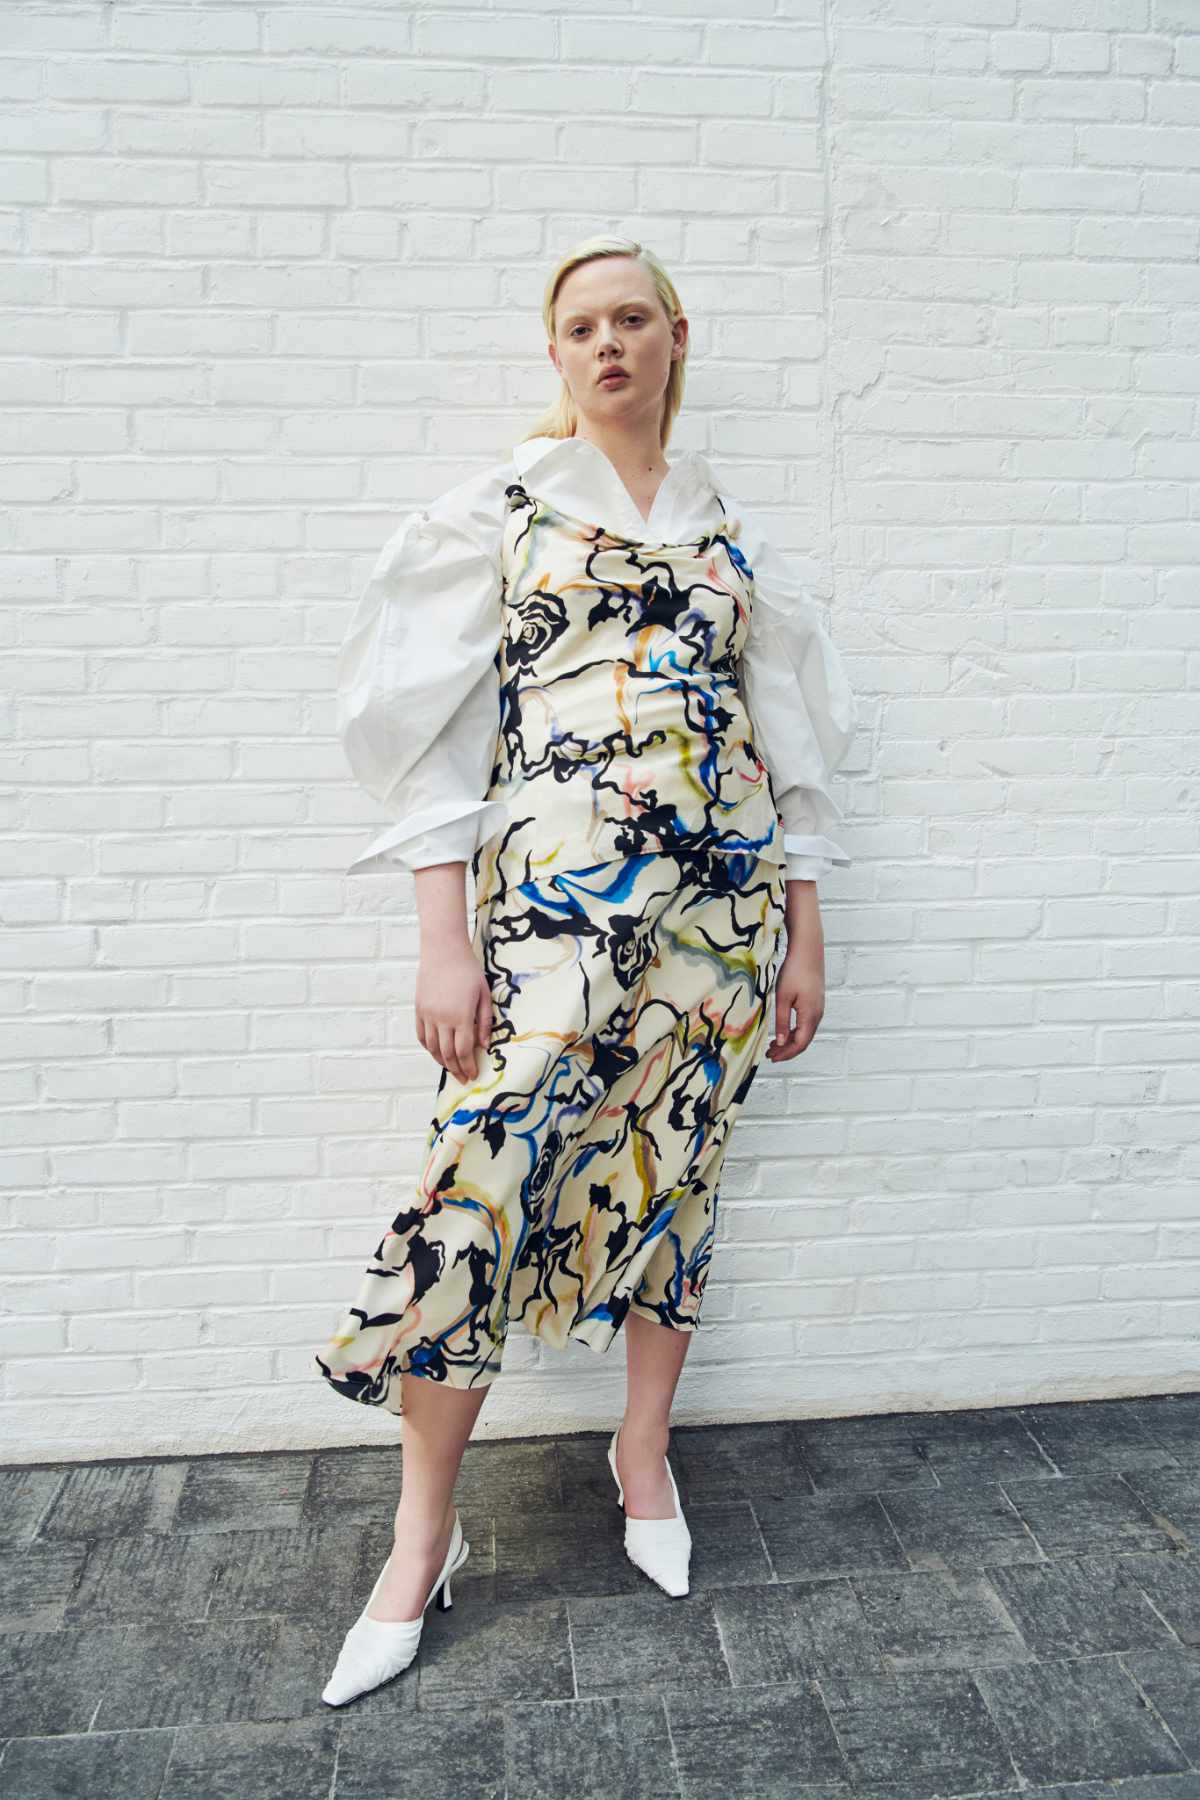 Tanya Taylor Presents Her New Spring 2023 Collection